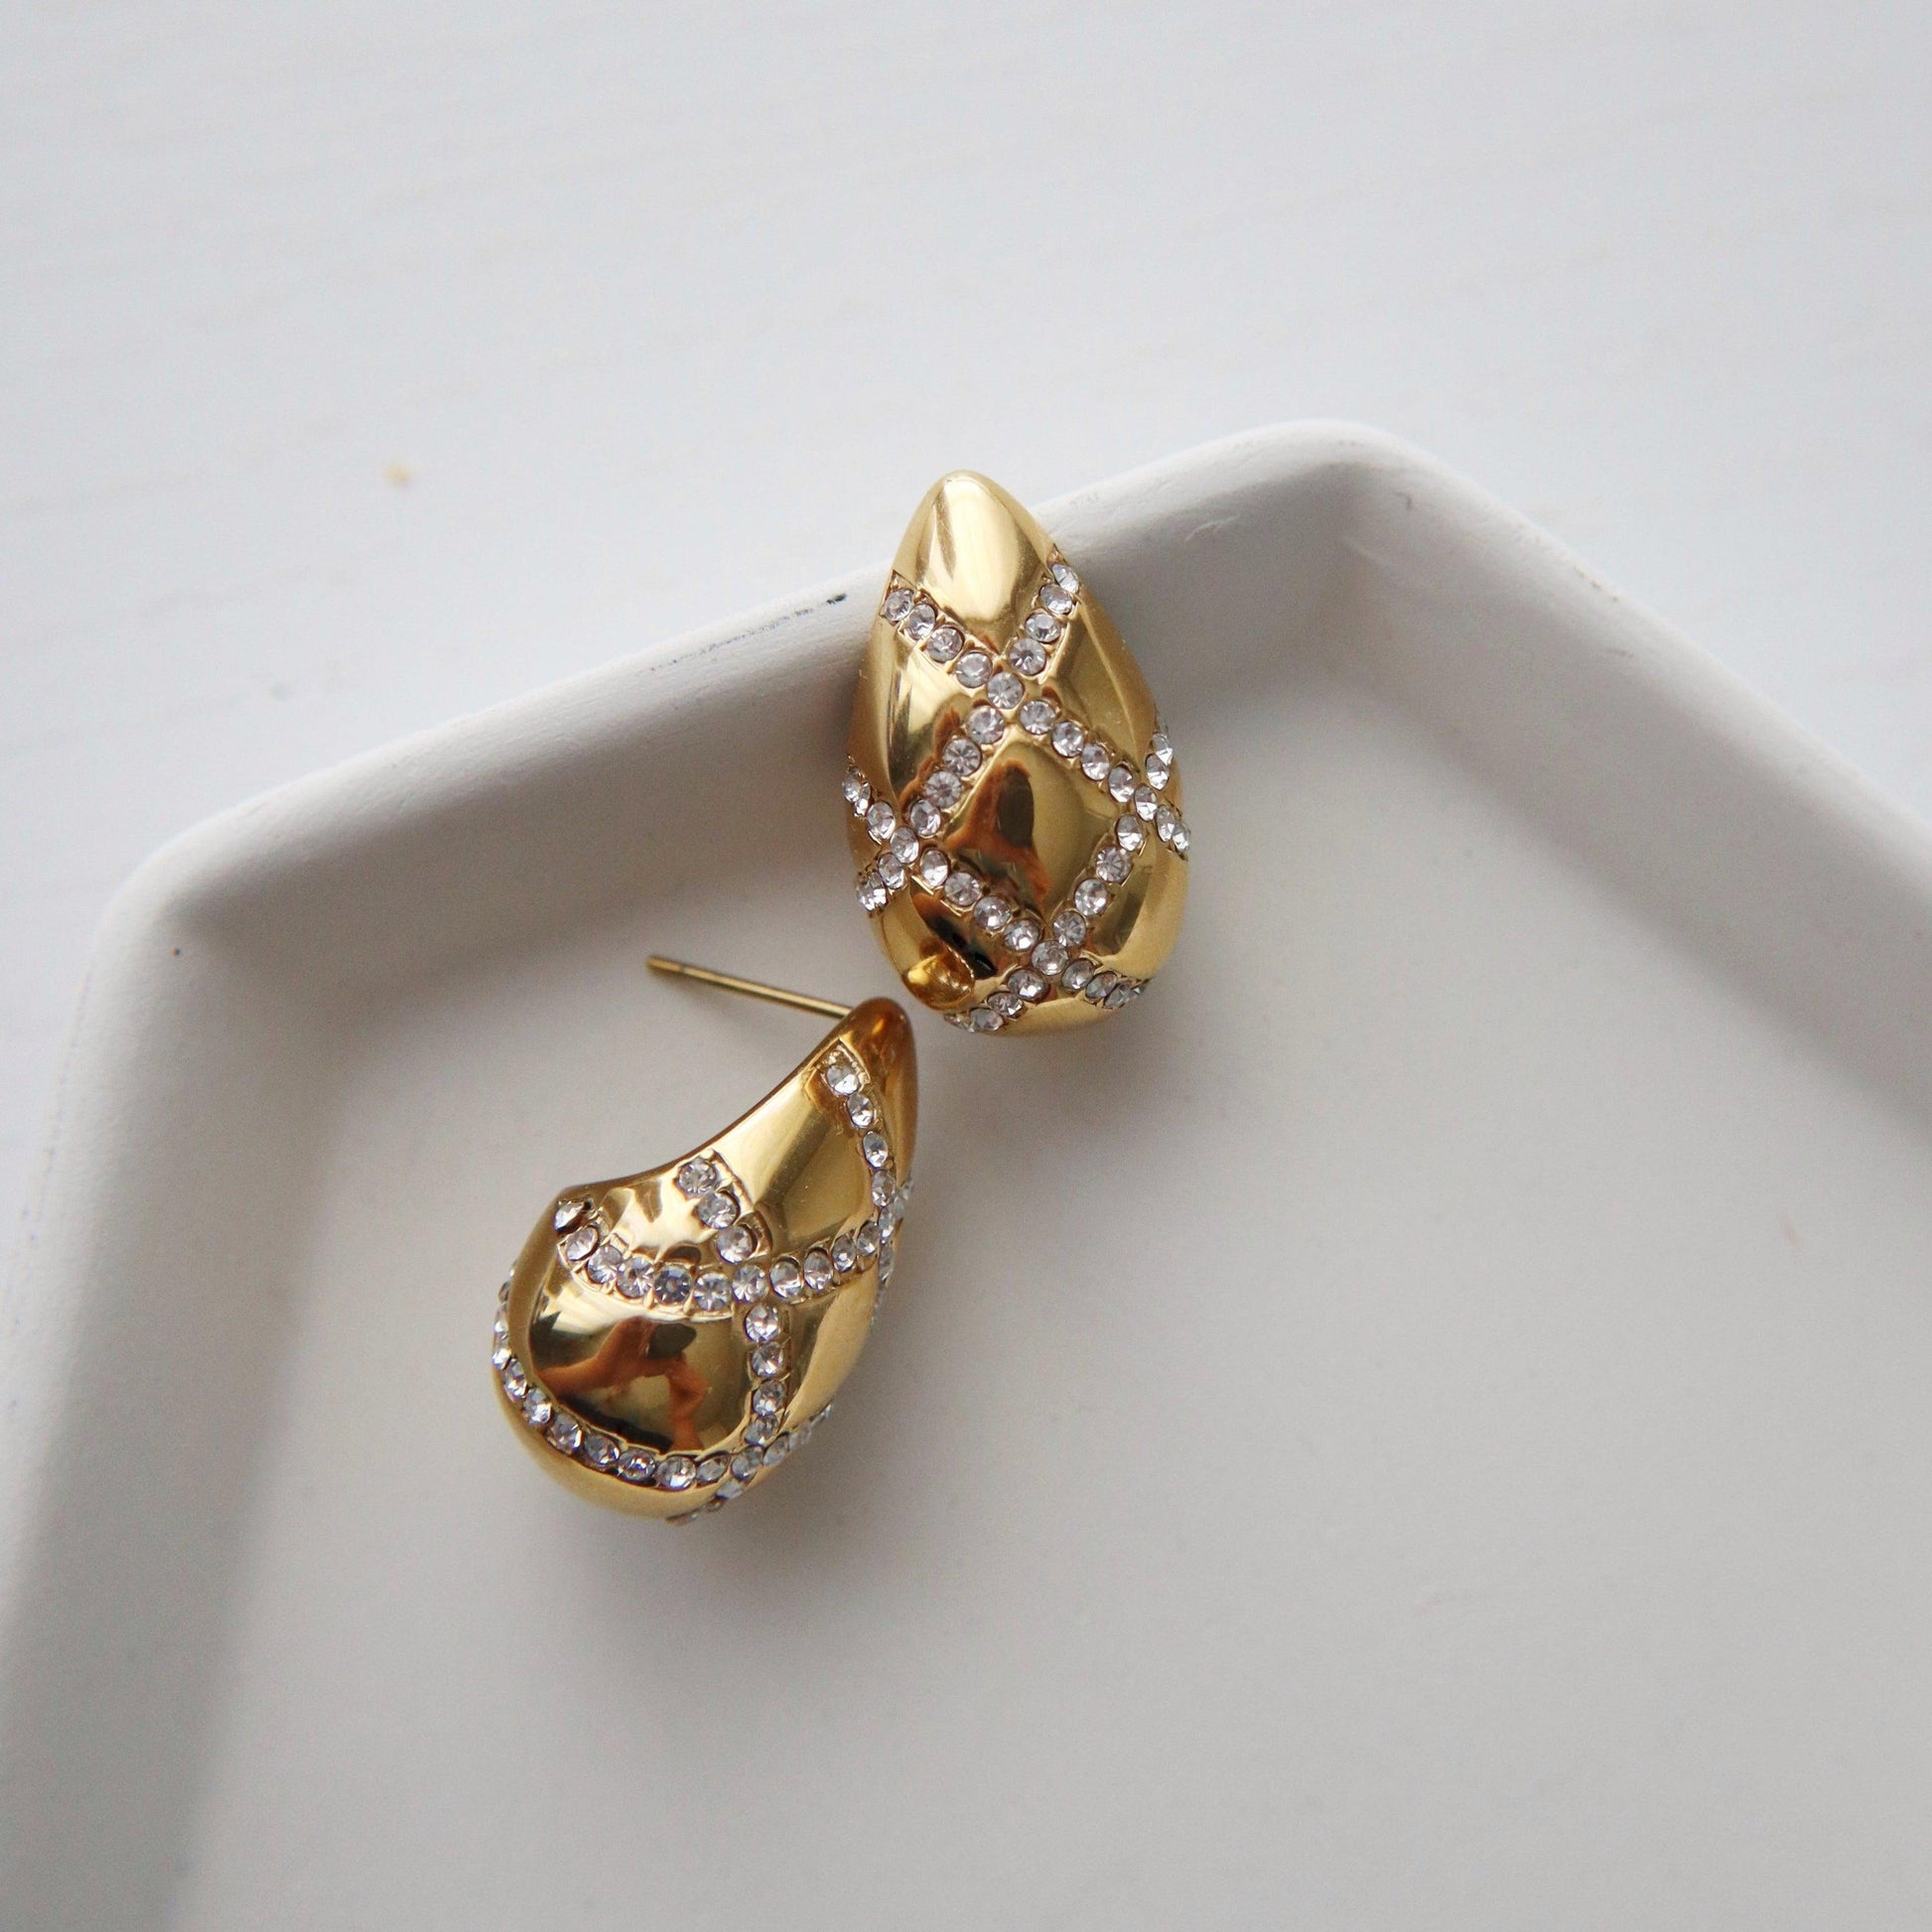 Pave Drop Earrings | Statement Earrings - JESSA JEWELRY | GOLD JEWELRY; dainty, affordable gold everyday jewelry. Tarnish free, water-resistant, hypoallergenic. Jewelry for everyday wear